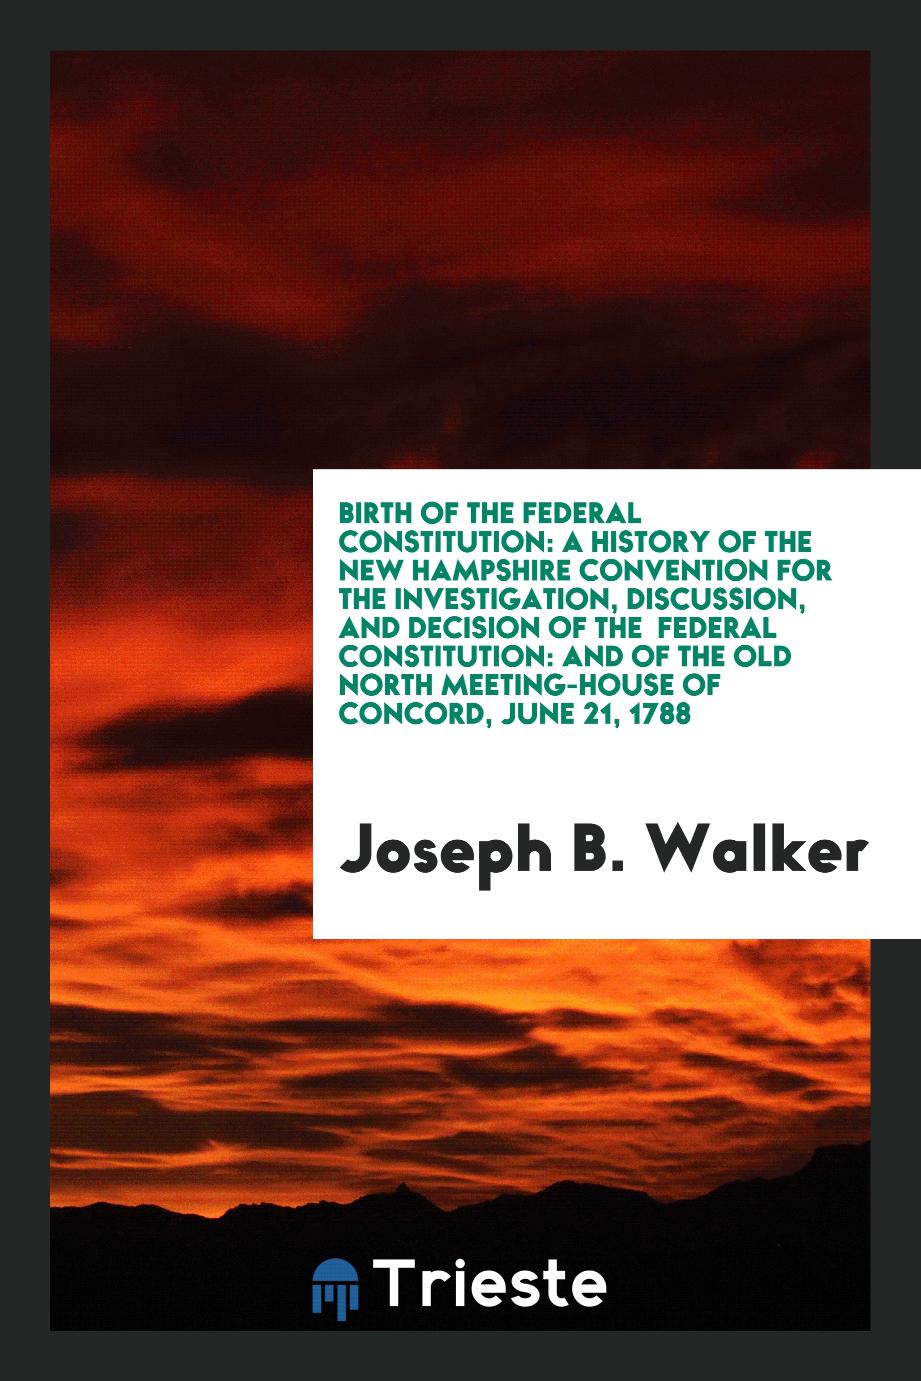 Birth of the Federal Constitution: A History of the New Hampshire Convention for the Investigation, Discussion, and Decision of the Federal Constitution: And of the Old North Meeting-House of Concord, June 21, 1788